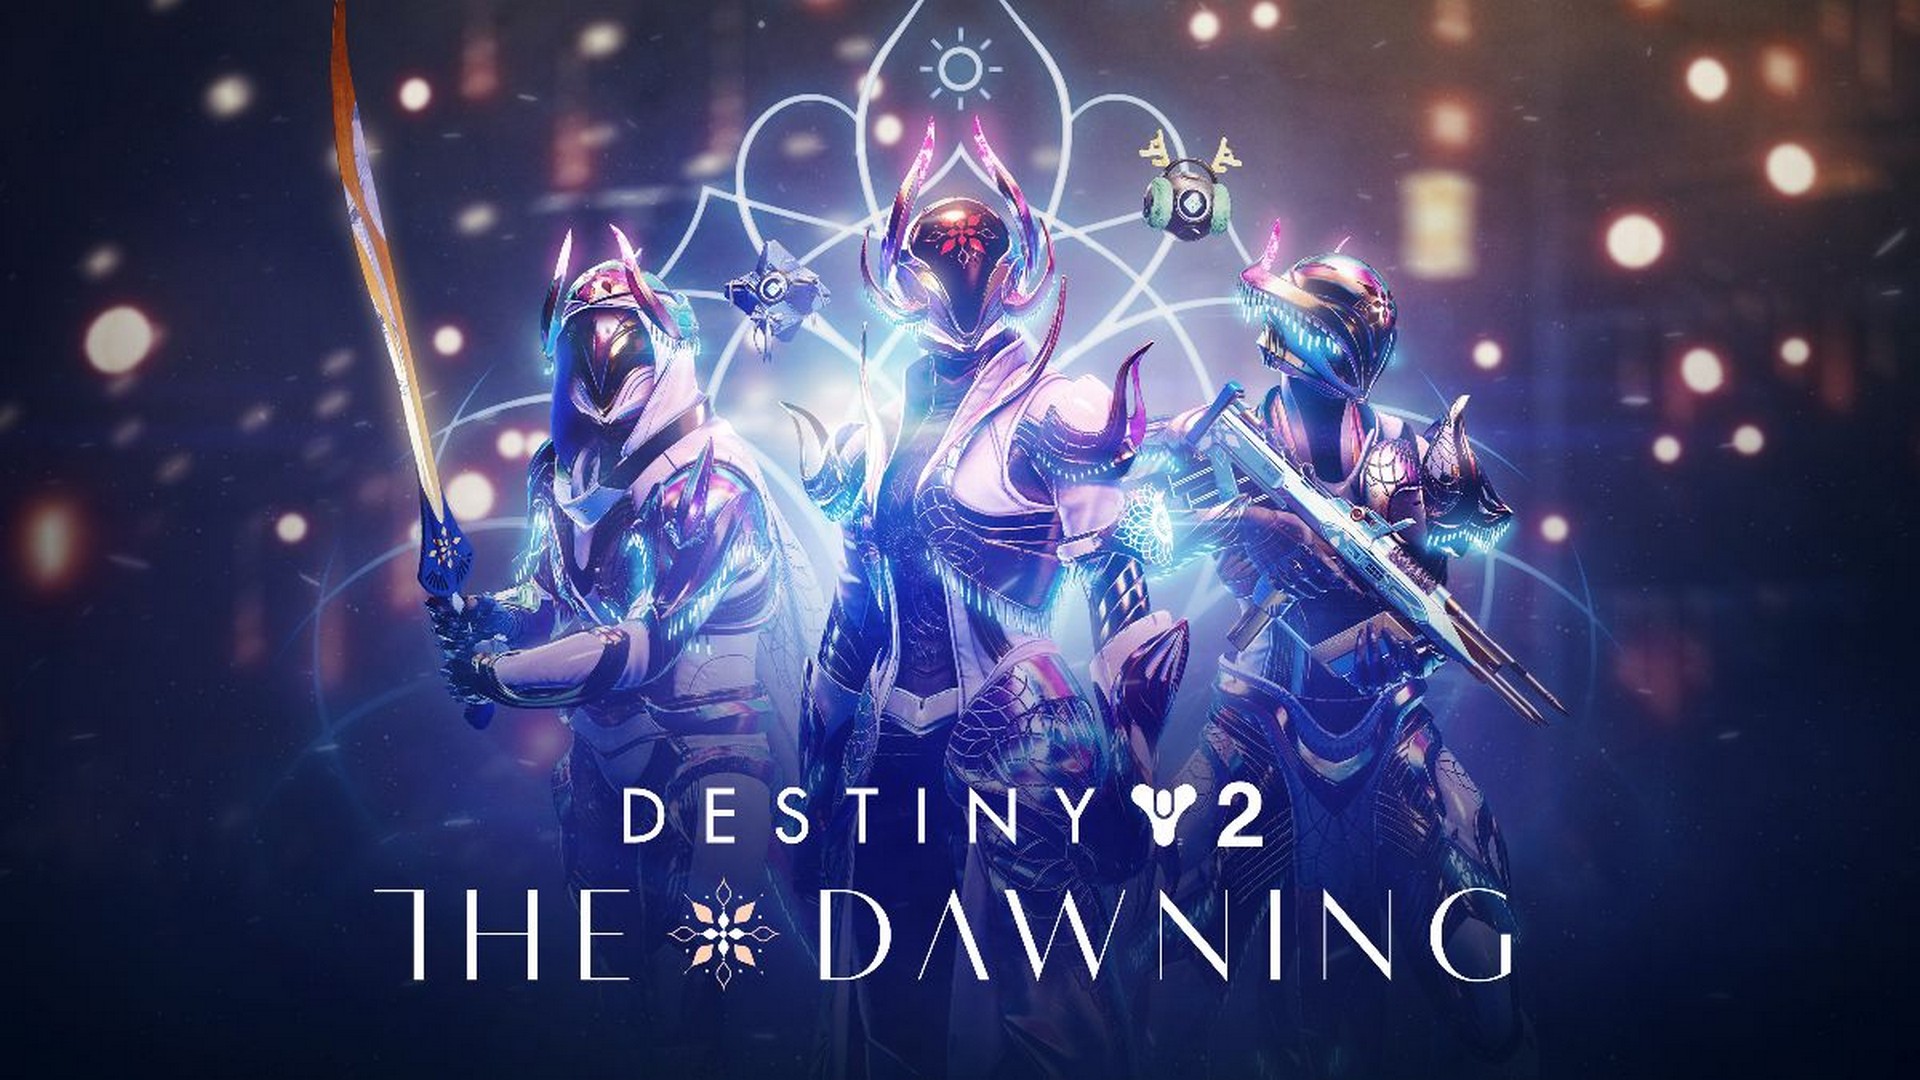 Celebrate The Dawning In Destiny 2 This Holiday Season With The First Stasis-Powered Sword, Snowball Fights, And More